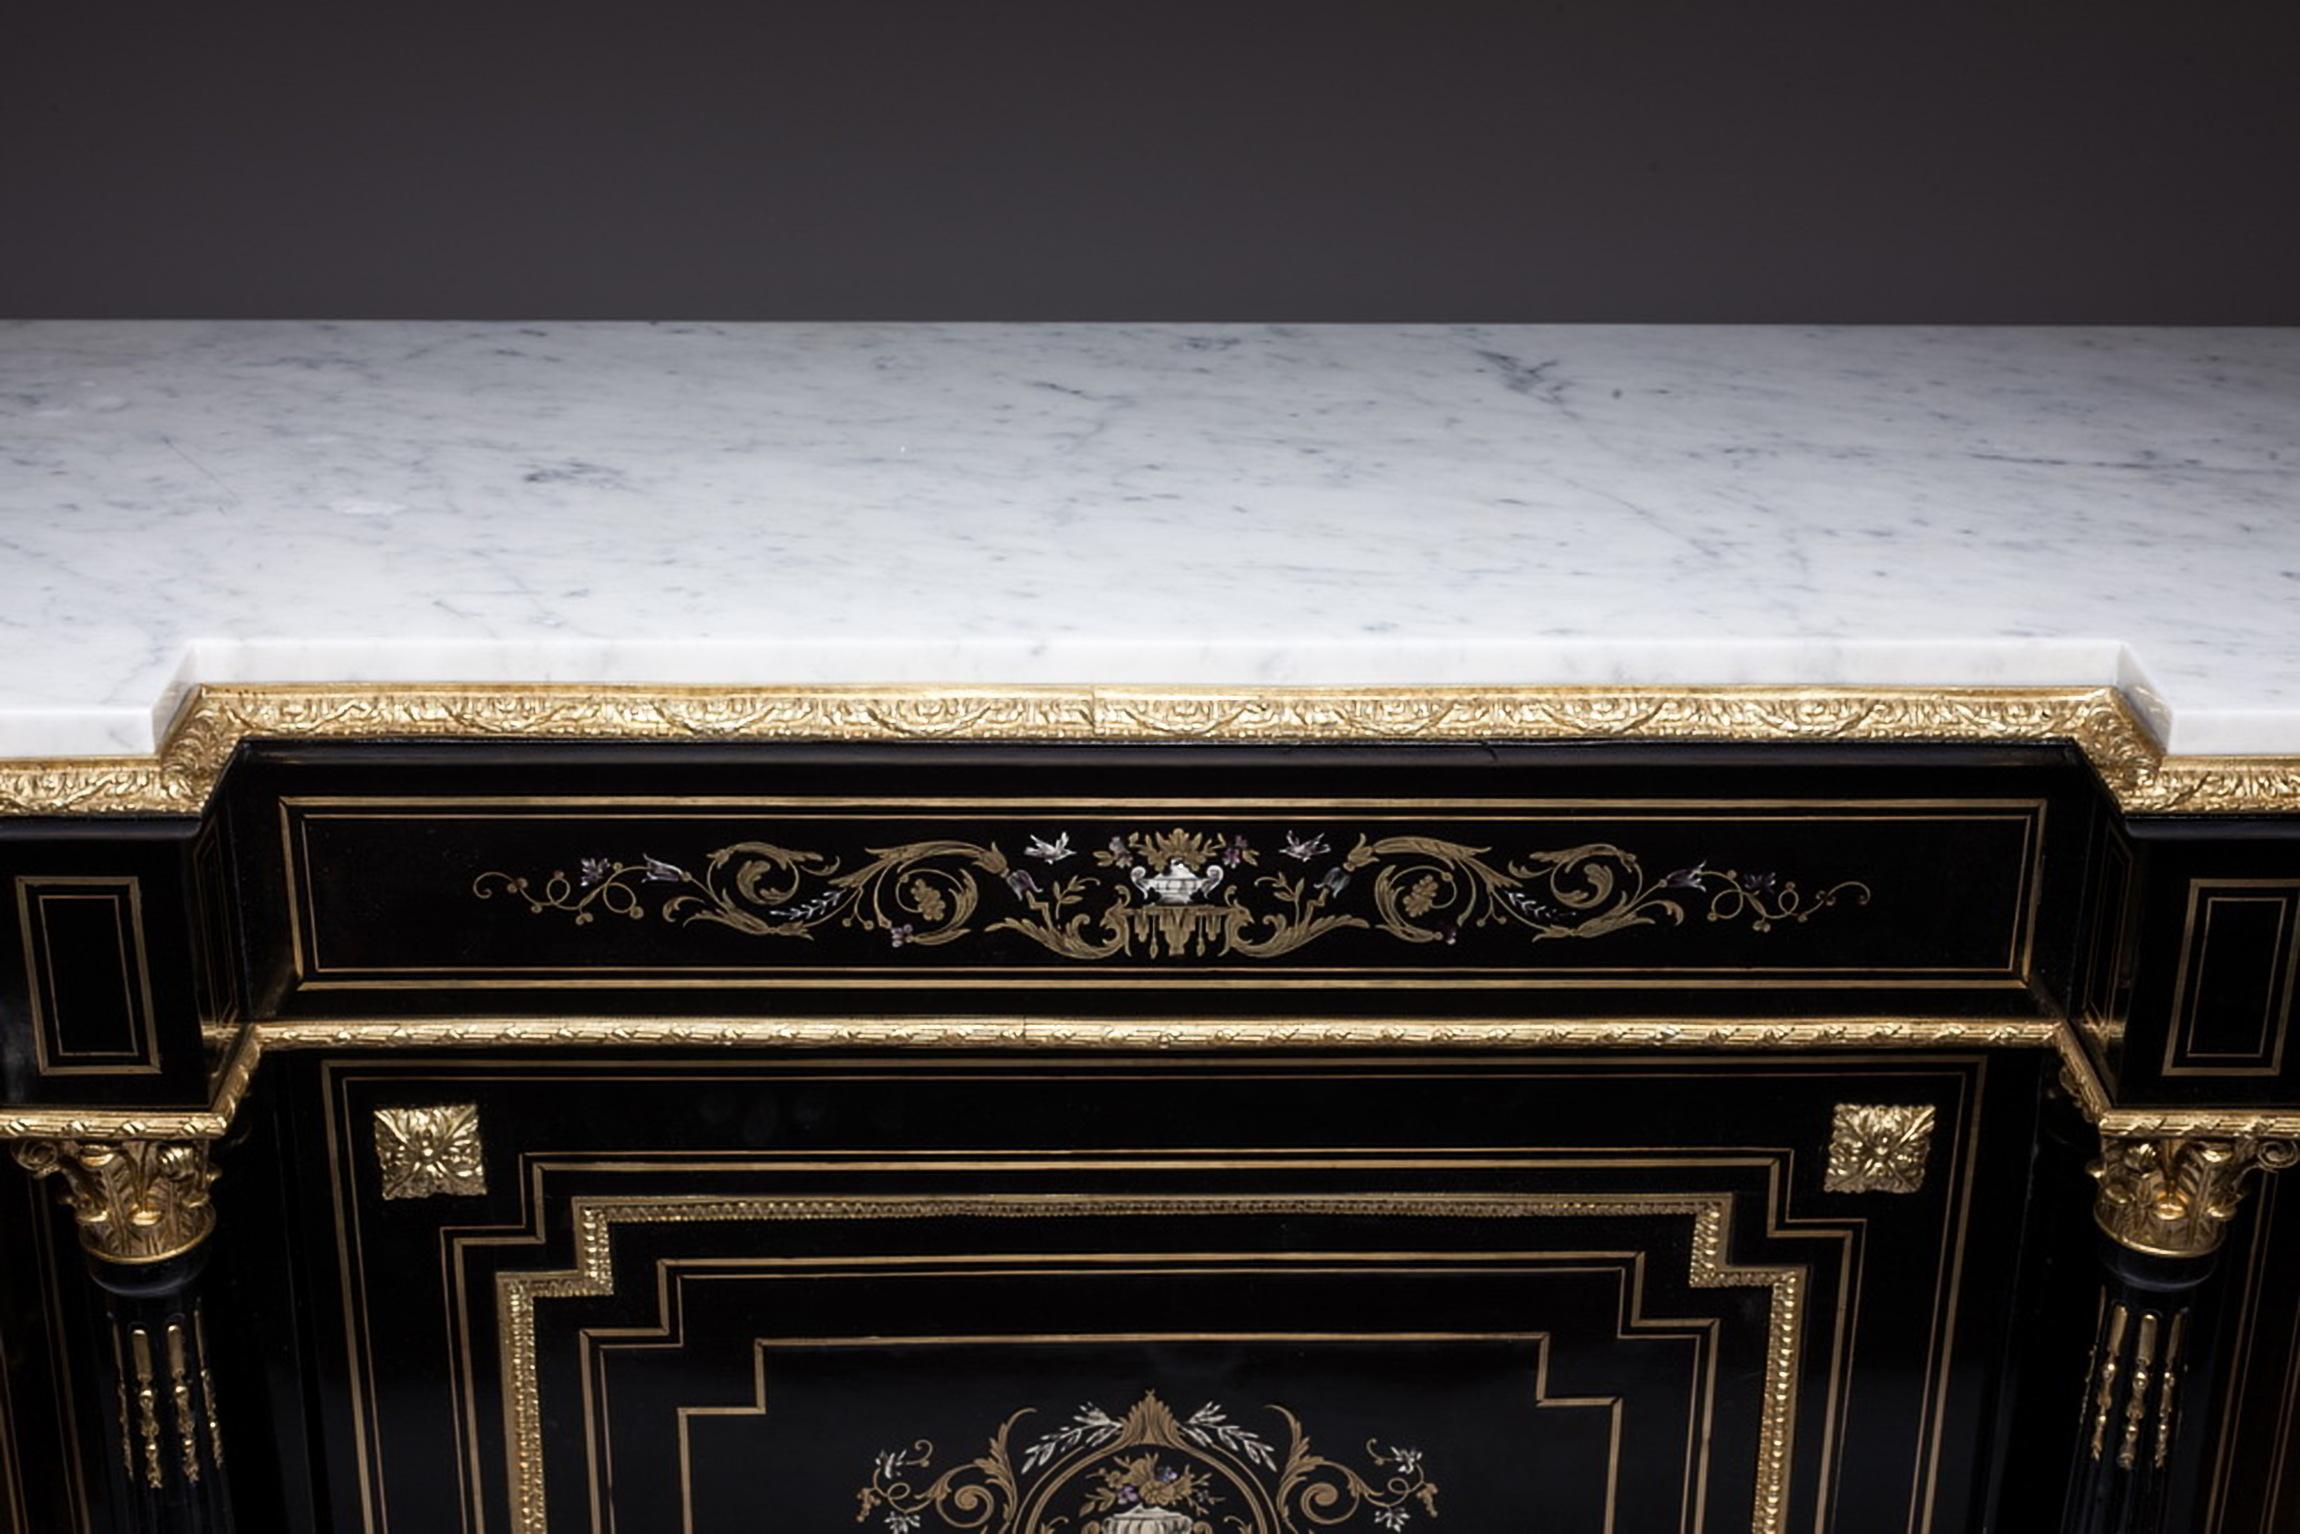 French Napoleon III ebonized and ormolu mounted, bronze and mother of pearl cabinet, circa 1860.
This beautiful cabinet is of Boulle marquetry of bronze and is inlaid with flower-filled urn, birds, ribbon-tied garlands made of pearls and bronze.